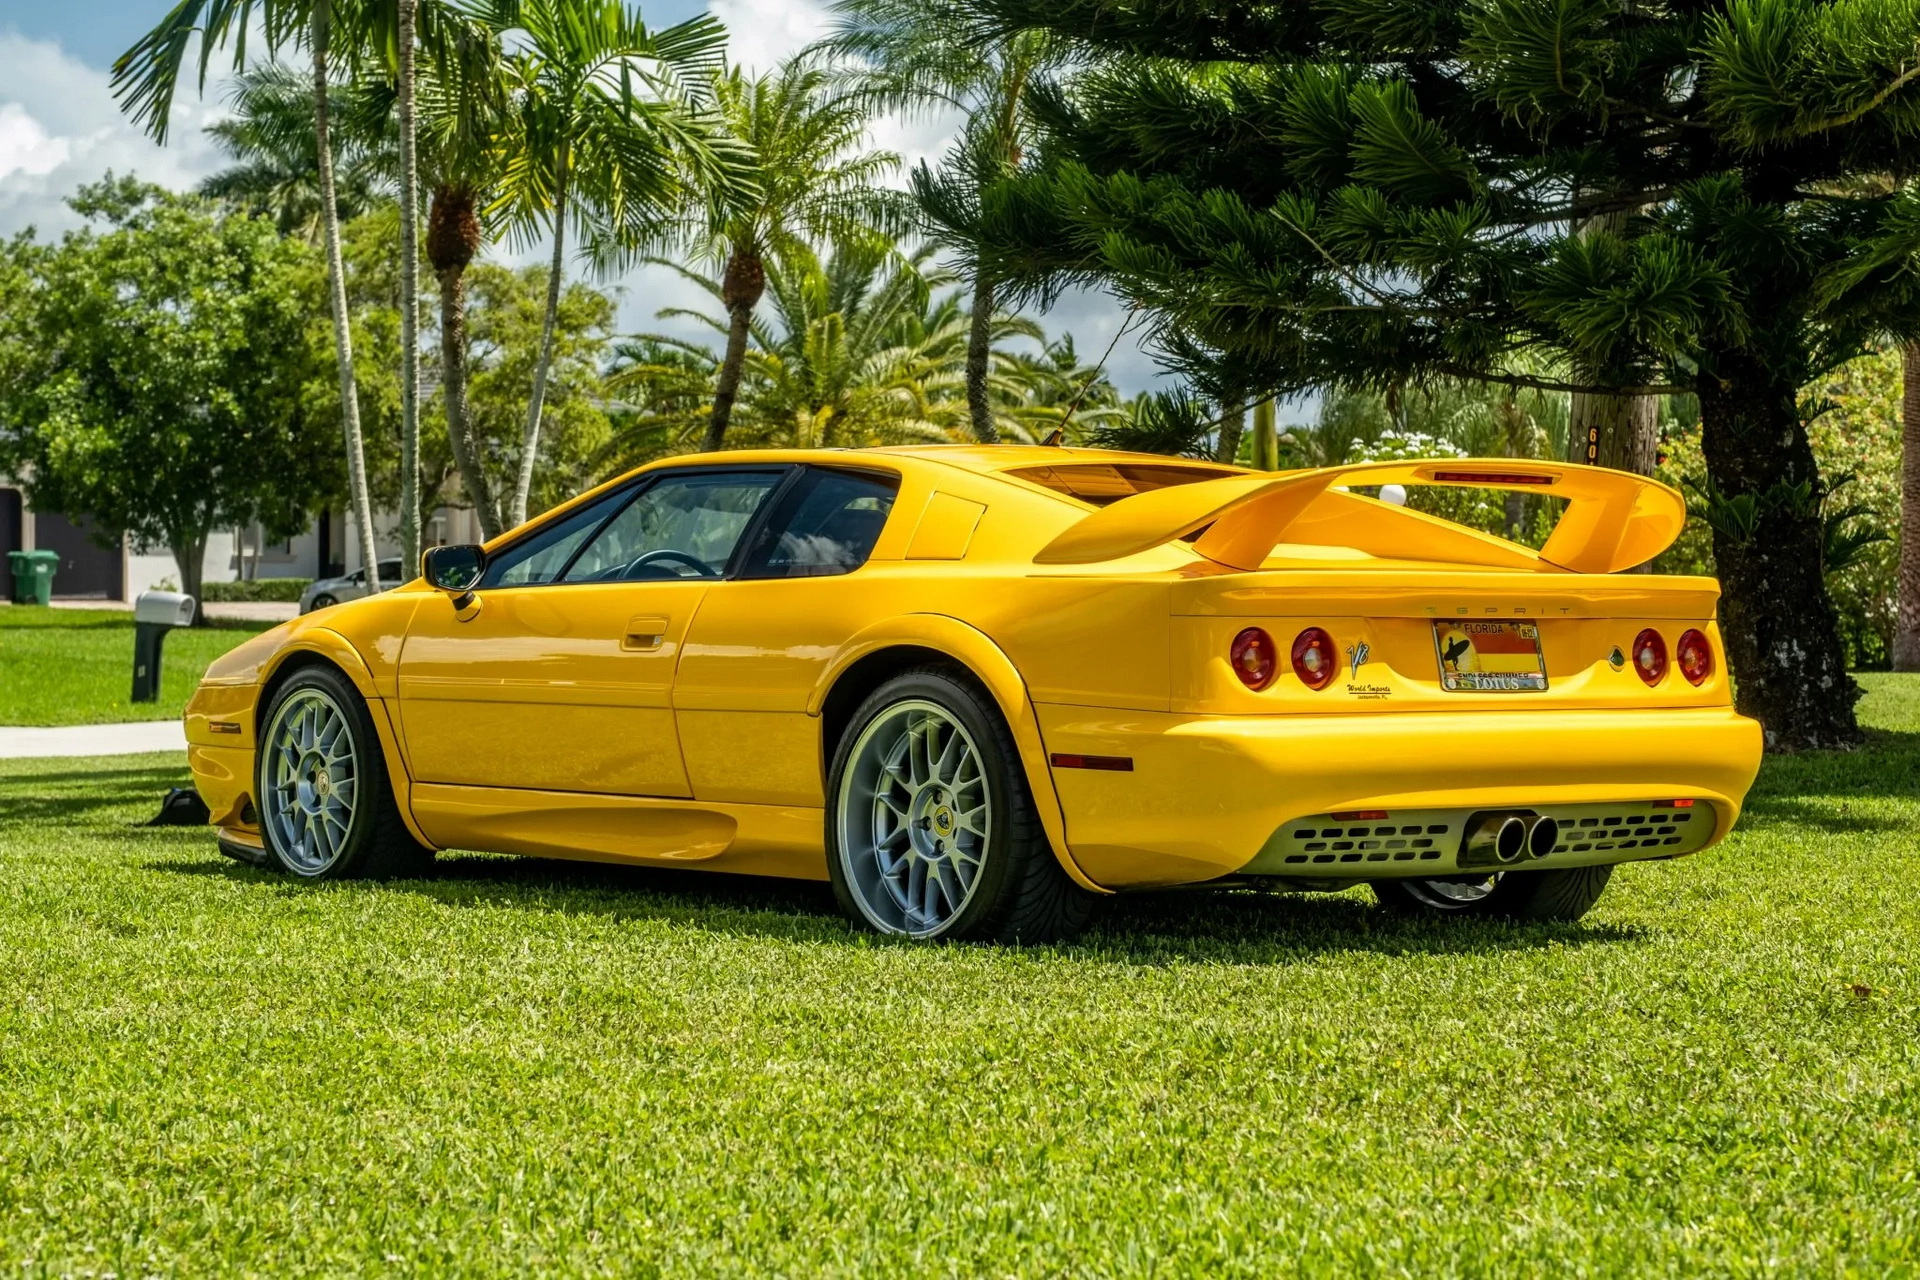 2003 Lotus Esprit V8 Last Edition Sells For Double The Price Of A Brand New  Emira | Carscoops